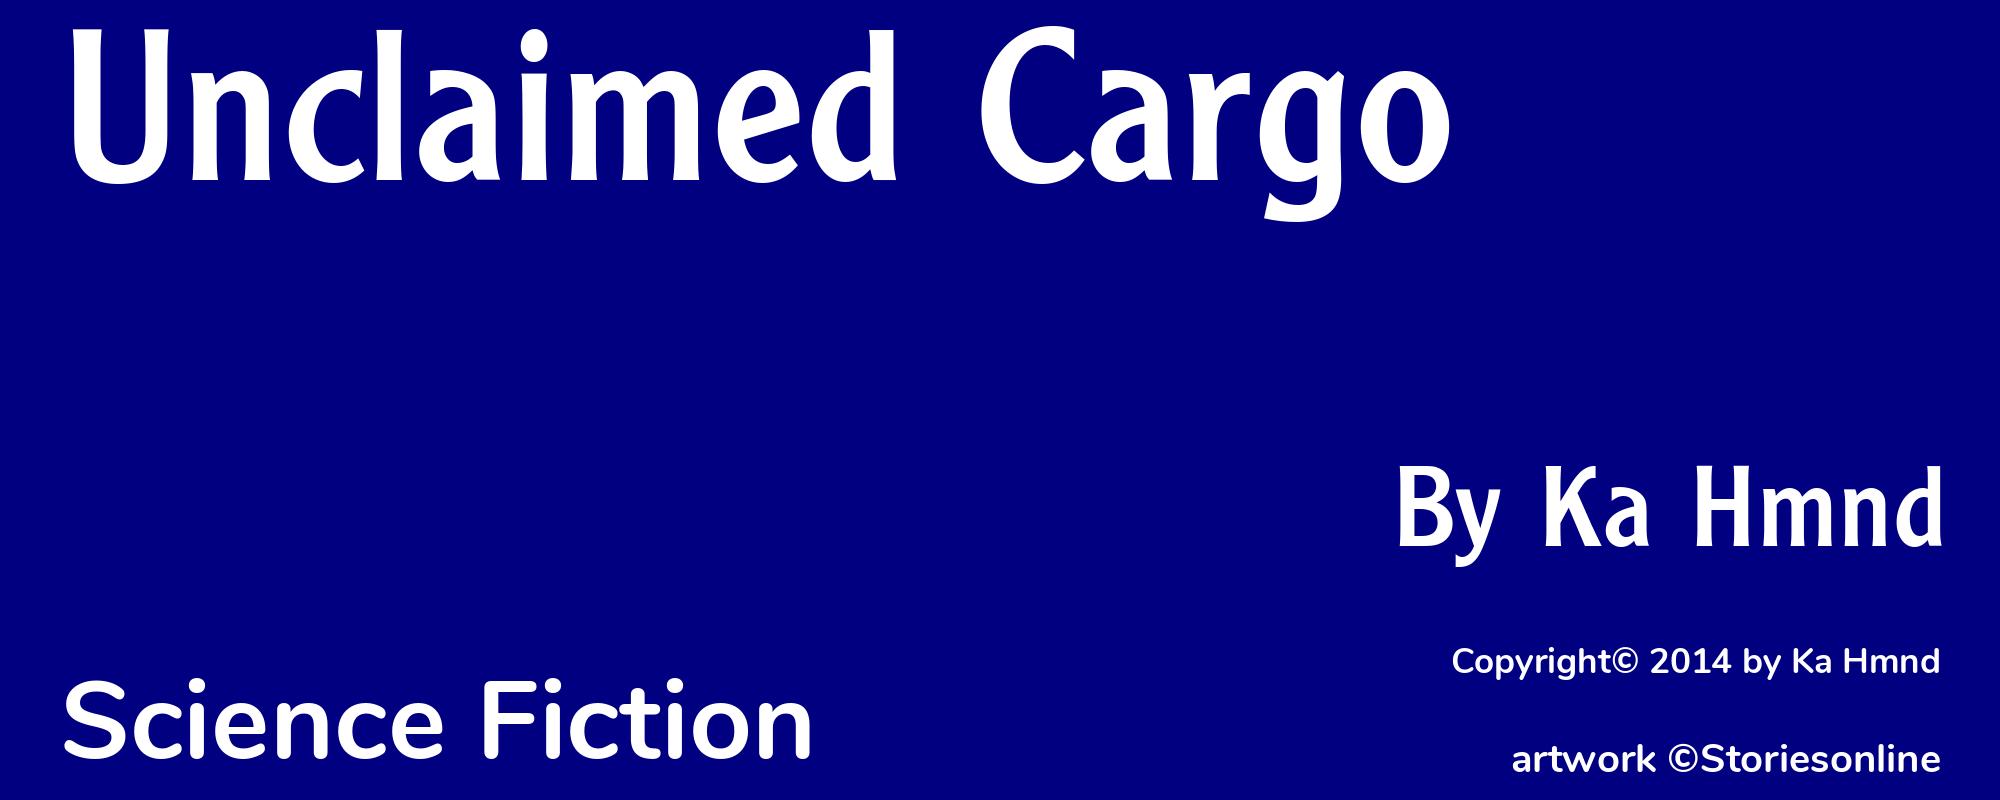 Unclaimed Cargo - Cover